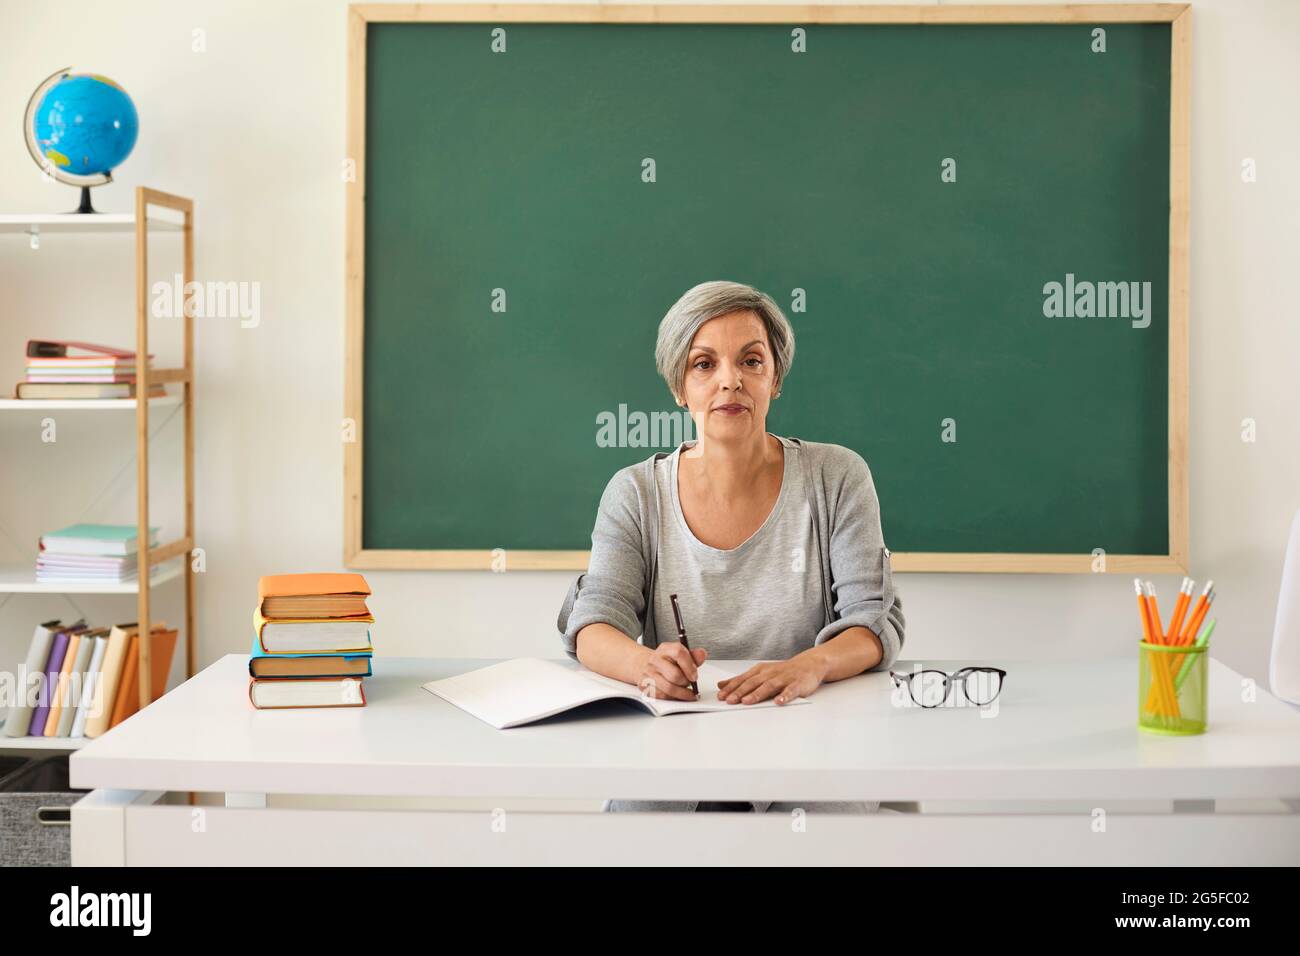 Teacher teaches. Serious senior woman teacher looking at the camera at lesson on the background of a greenboard in the classroom. Stock Photo